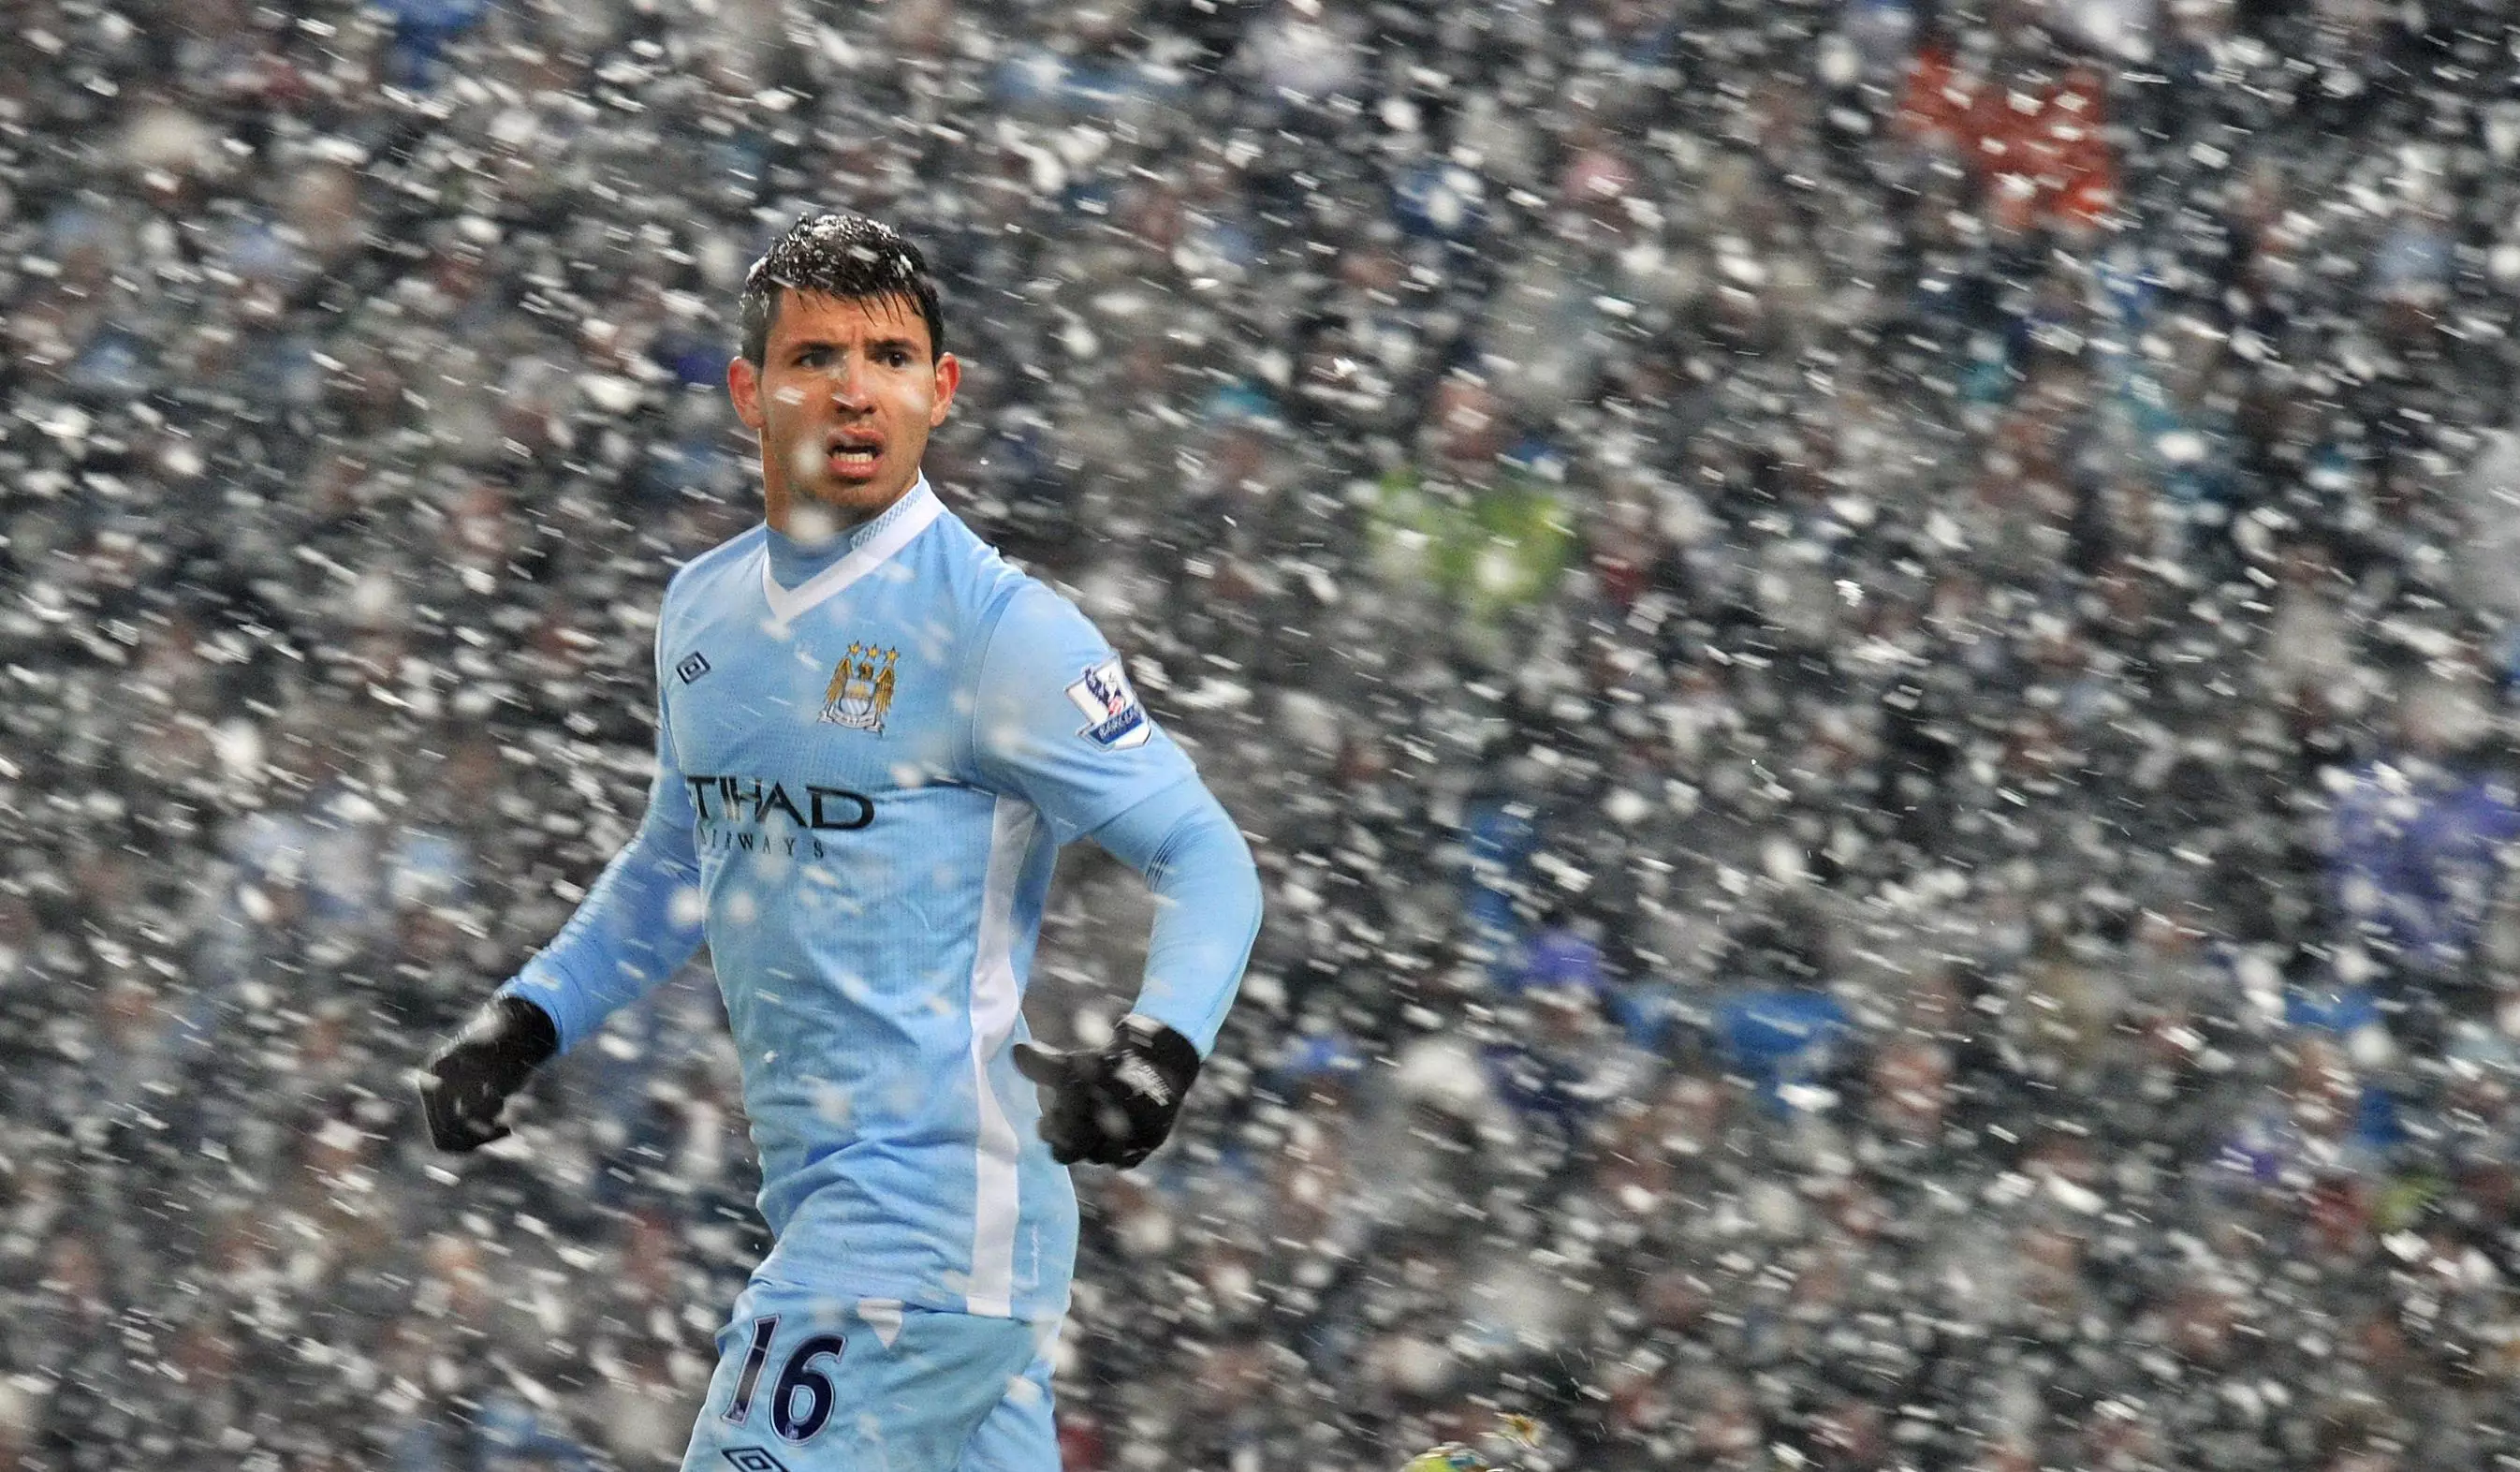 Aguero in the snow during a February Premier League fixture in 2012. Image: PA